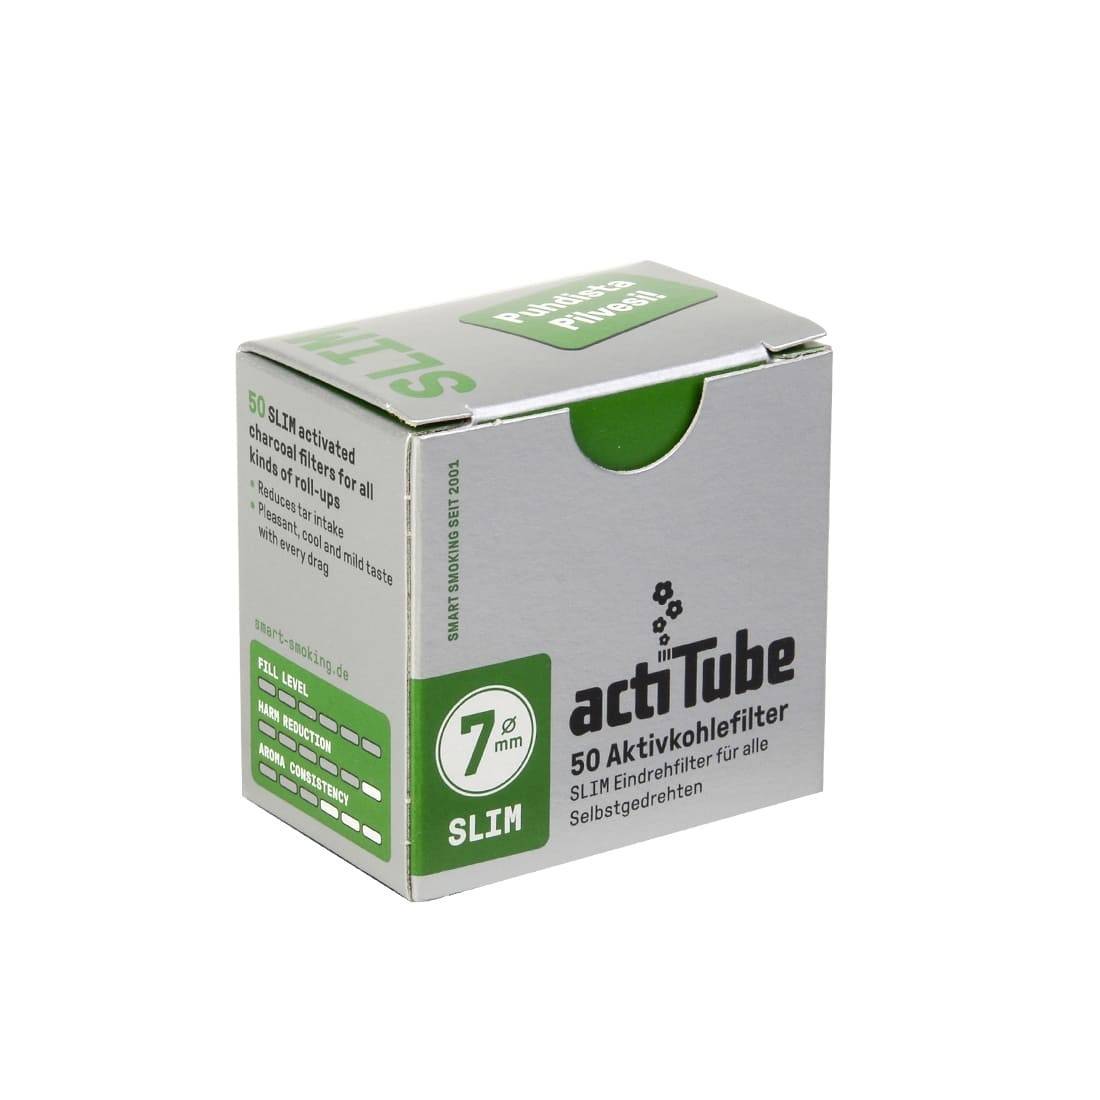  actiTube - Activated Charcoal Filters for Rolling 8,4mm - 1 Box  = 100 Filters : Health & Household